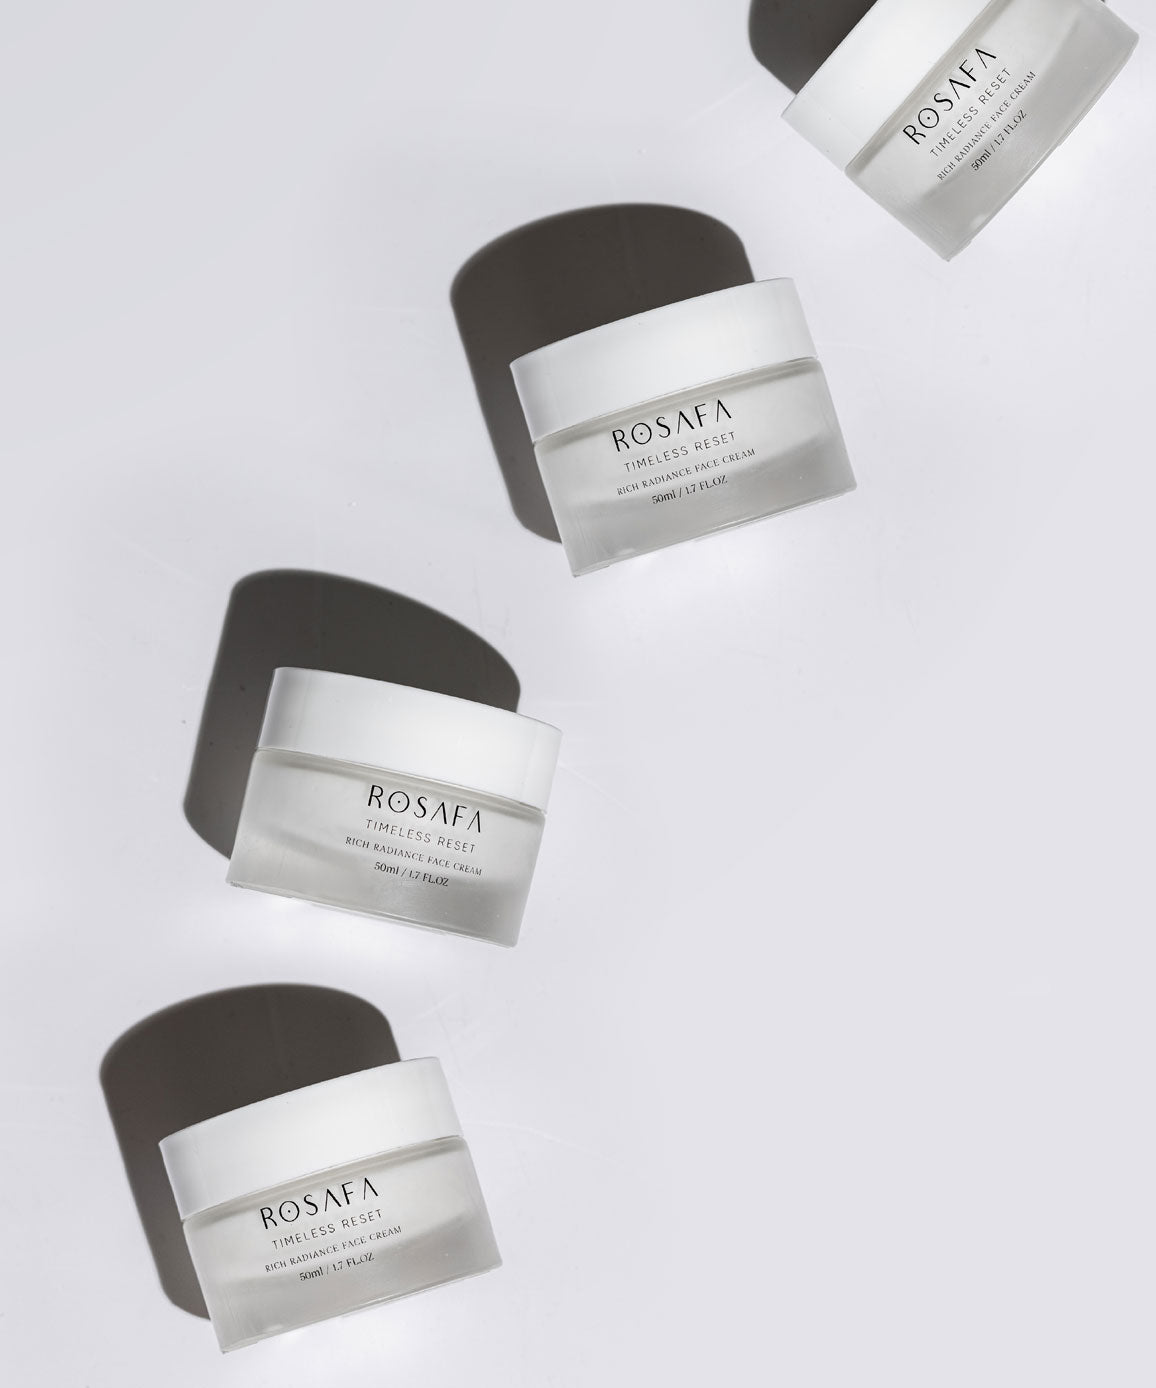 four rosafa timeless reset face creams on the white background